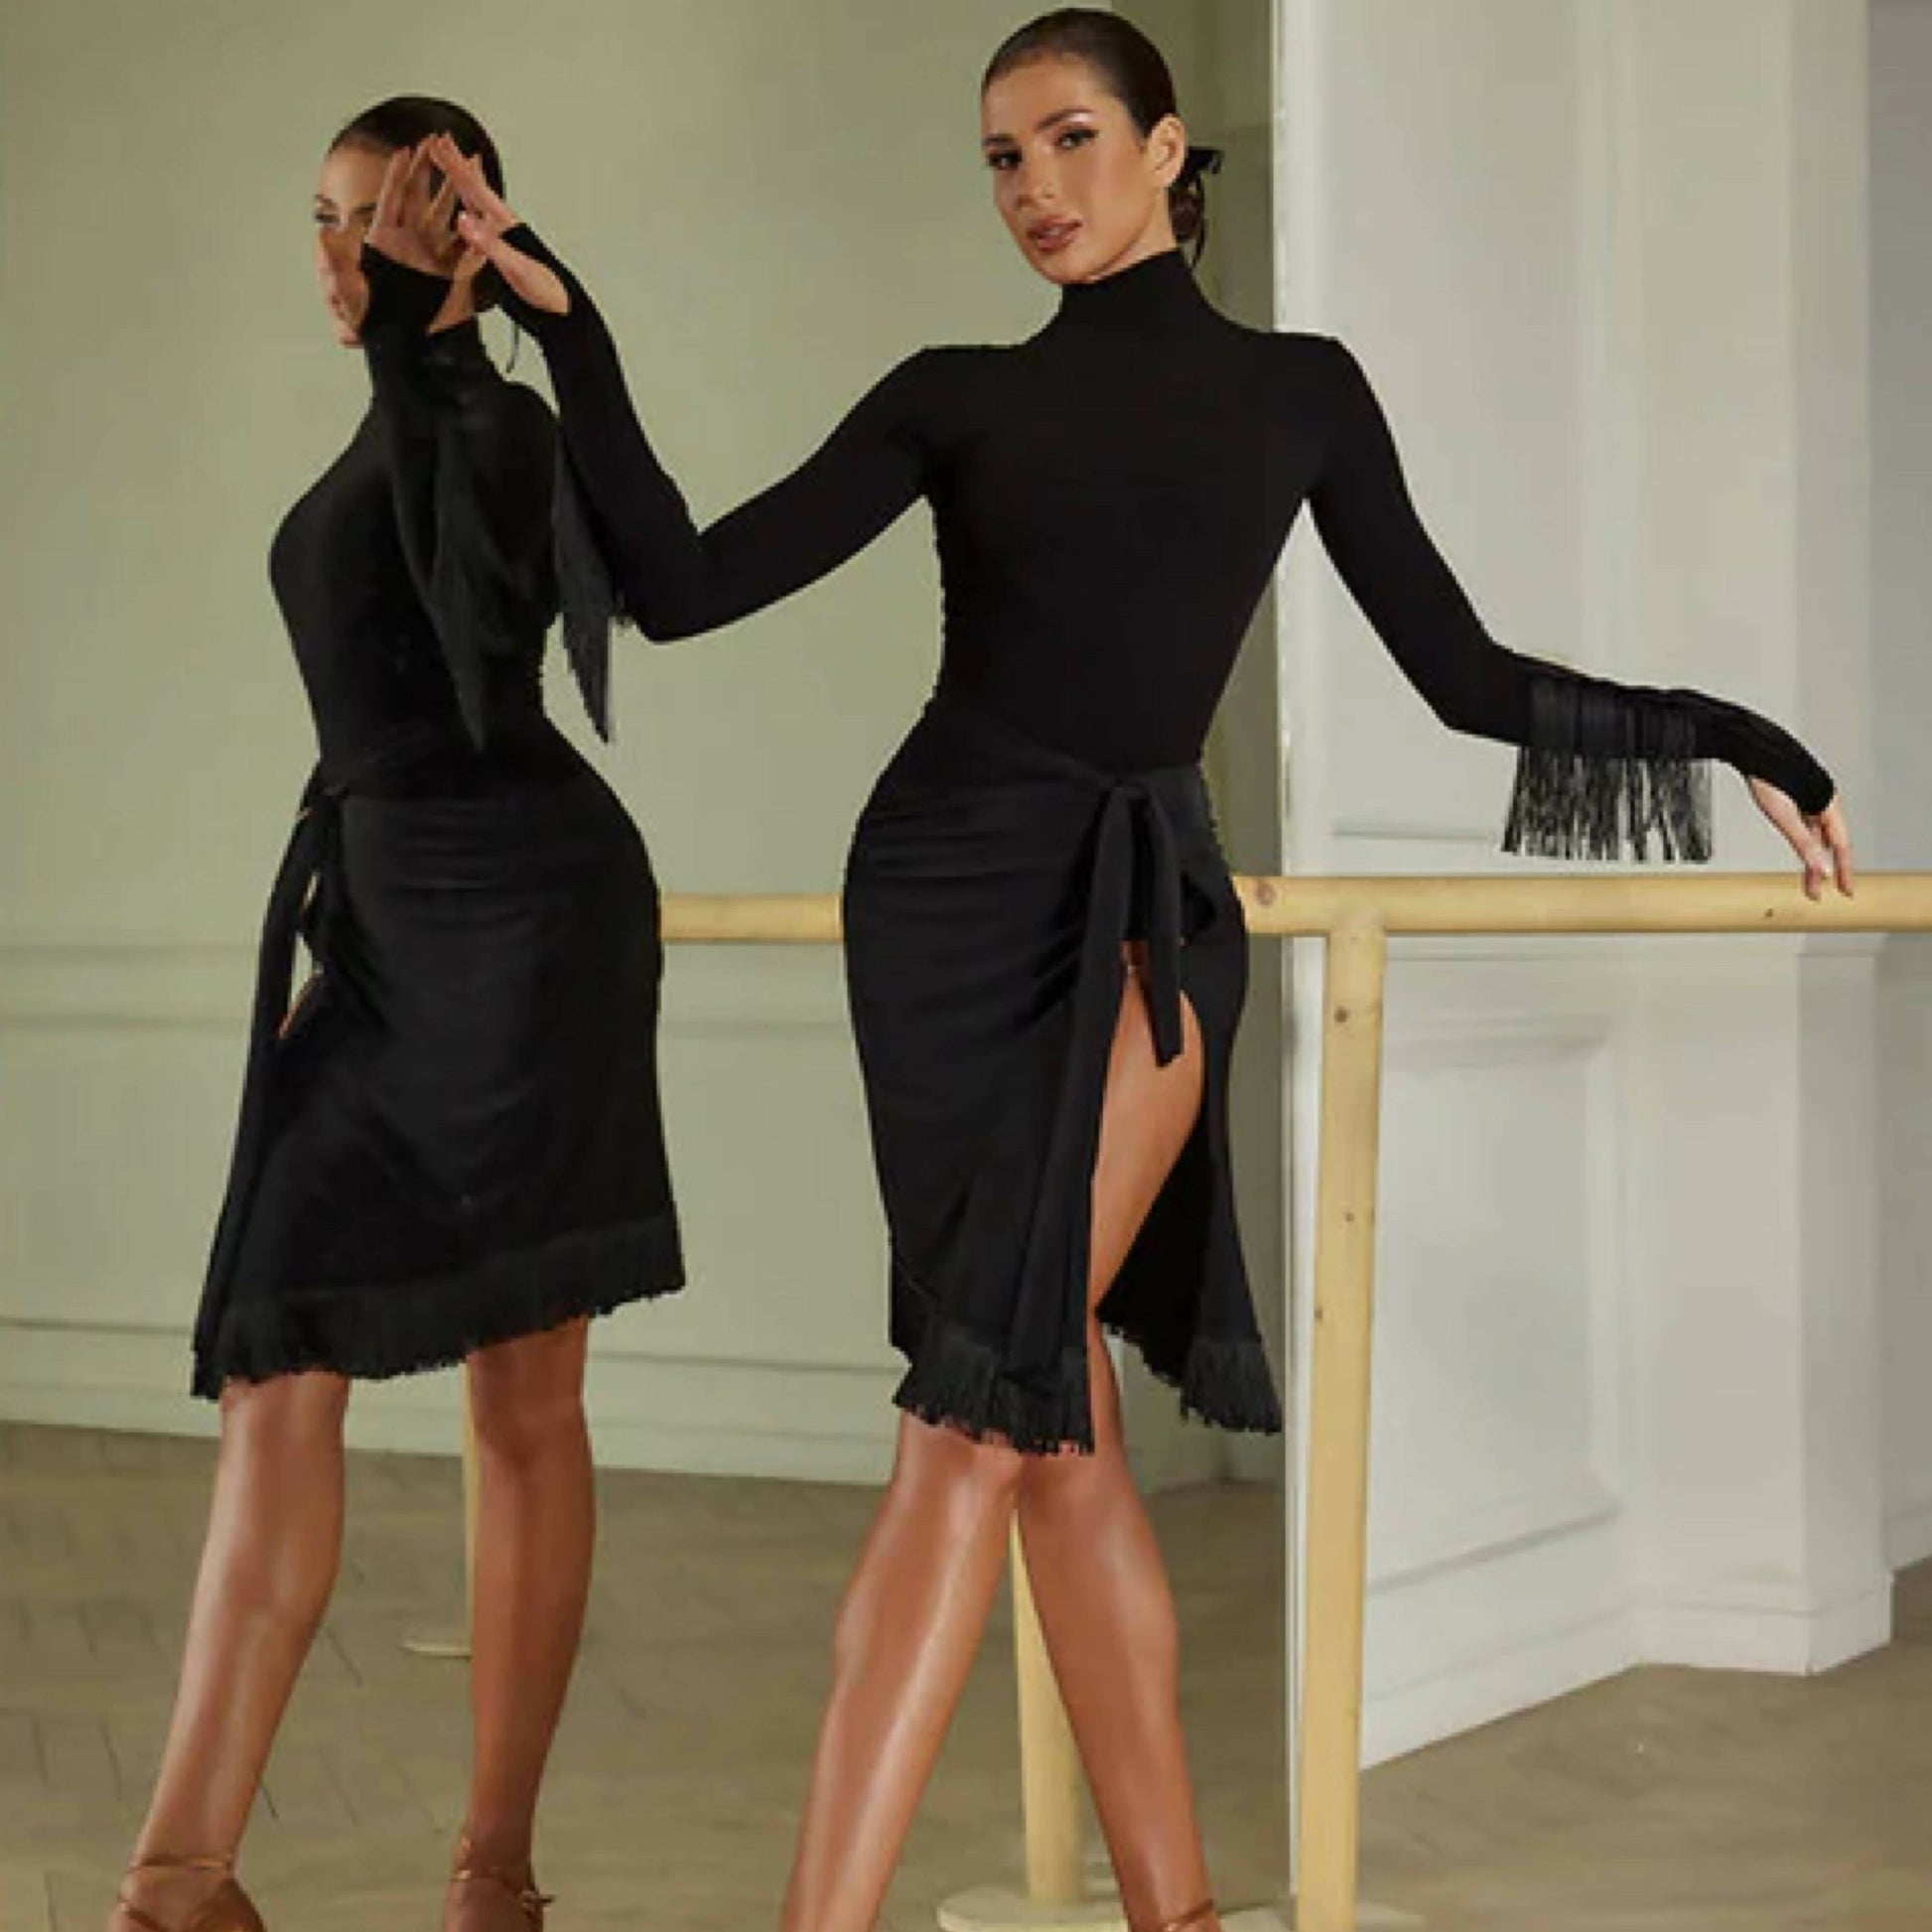 Latin Dancewear including body long sleeves with fringes and black practice skirt with fringes